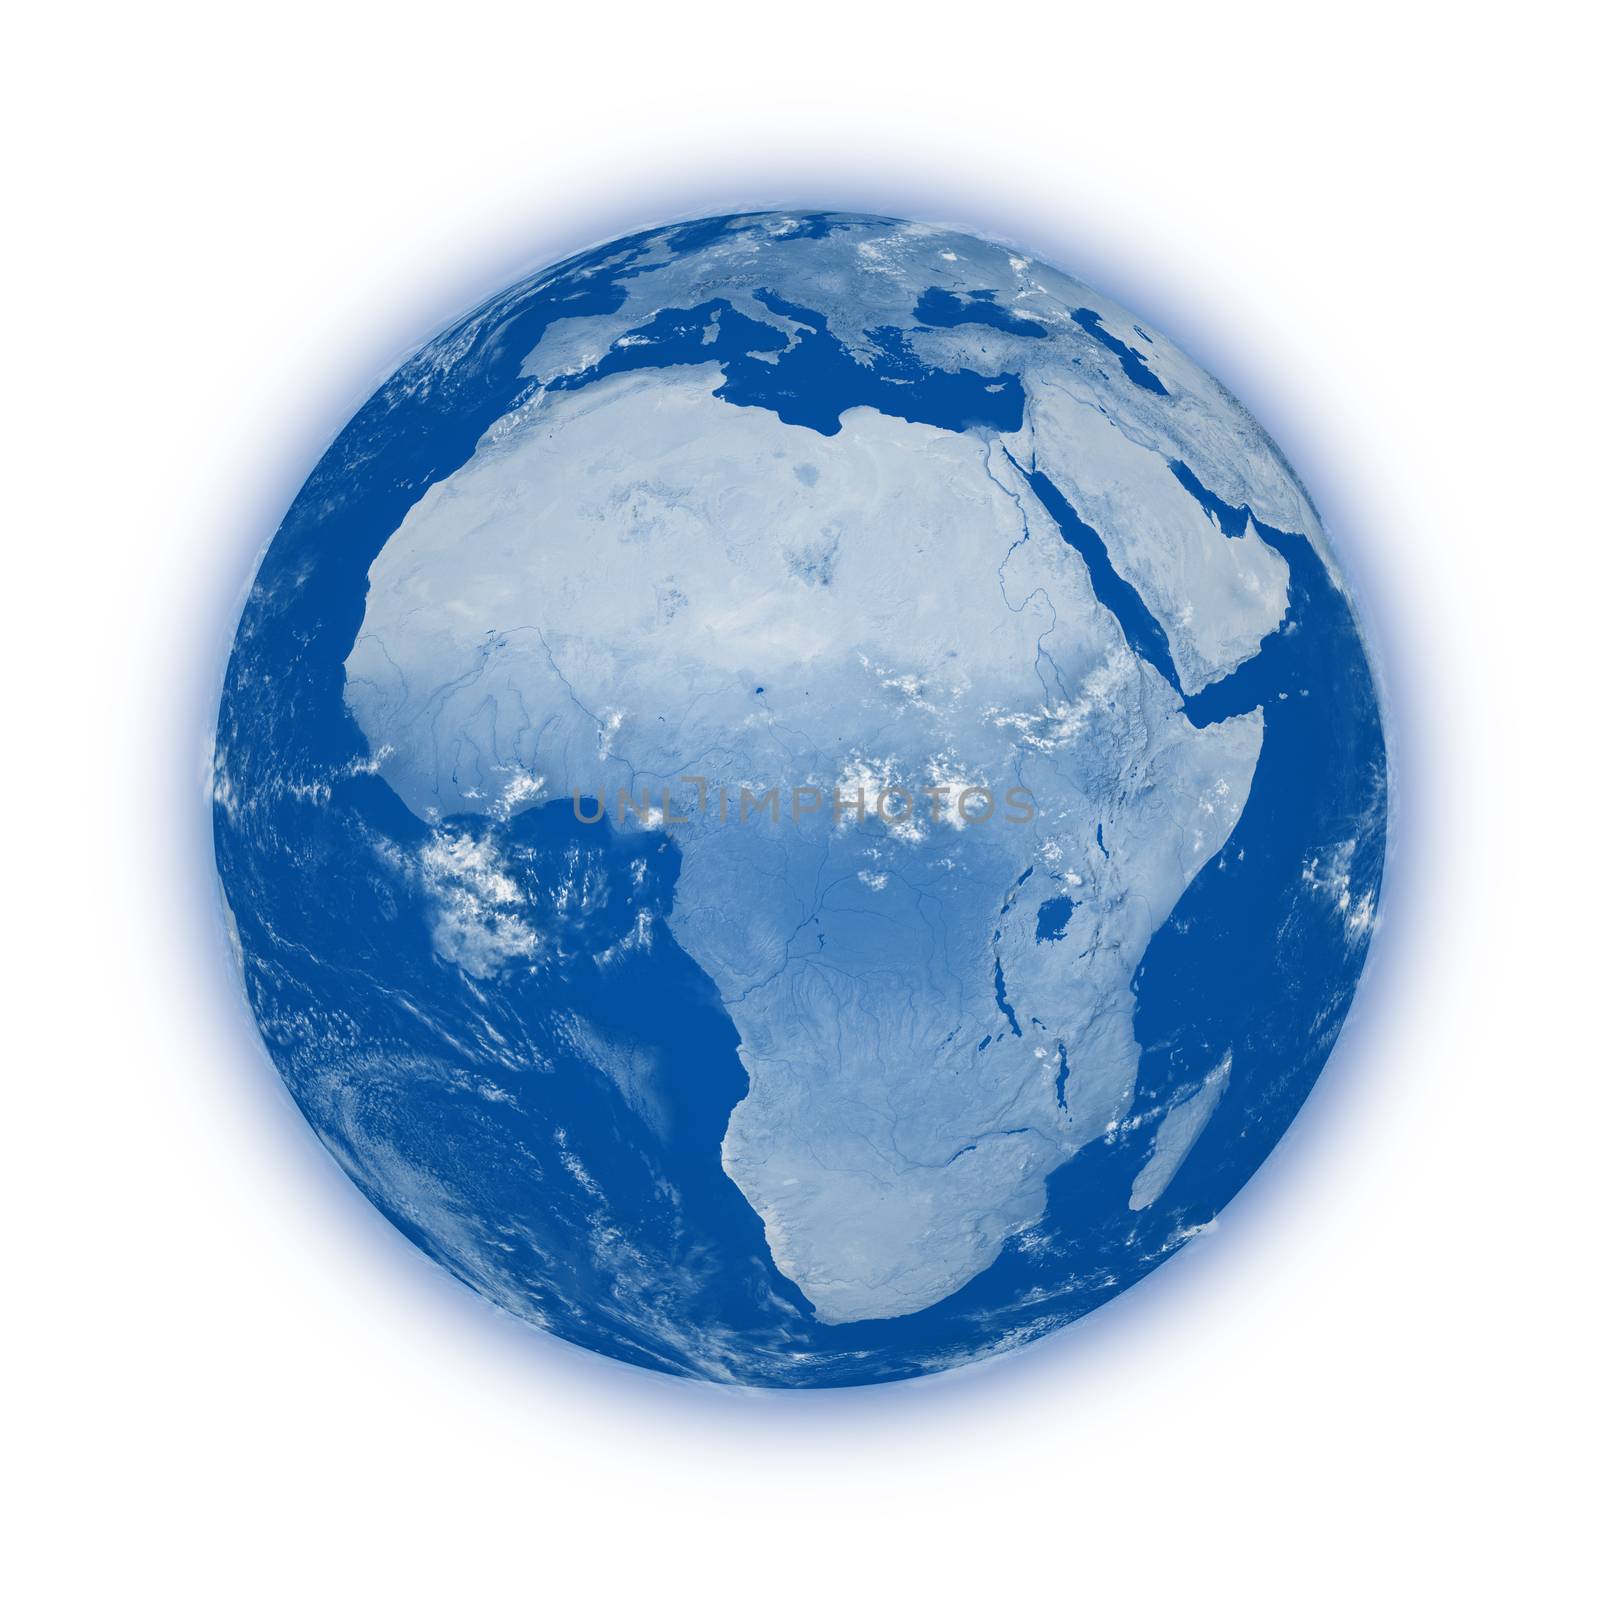 Africa on blue planet Earth isolated on white background. Highly detailed planet surface. Elements of this image furnished by NASA.